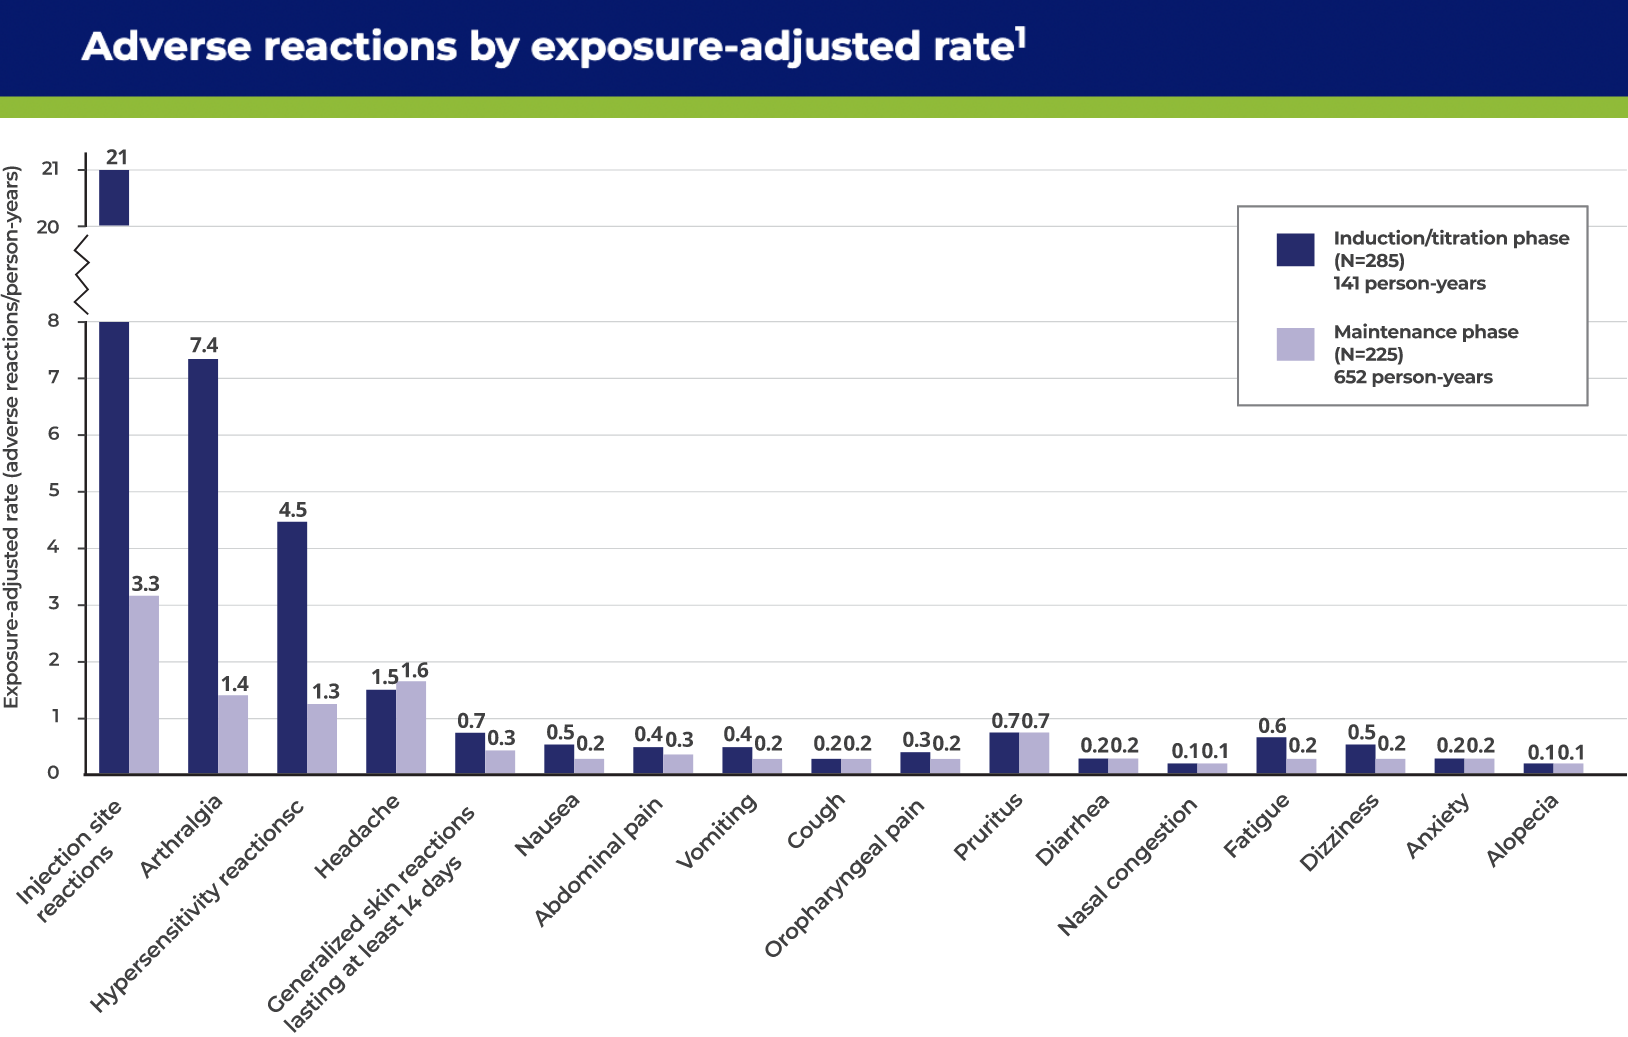 Adverse reactions by exposure-adjusted rate